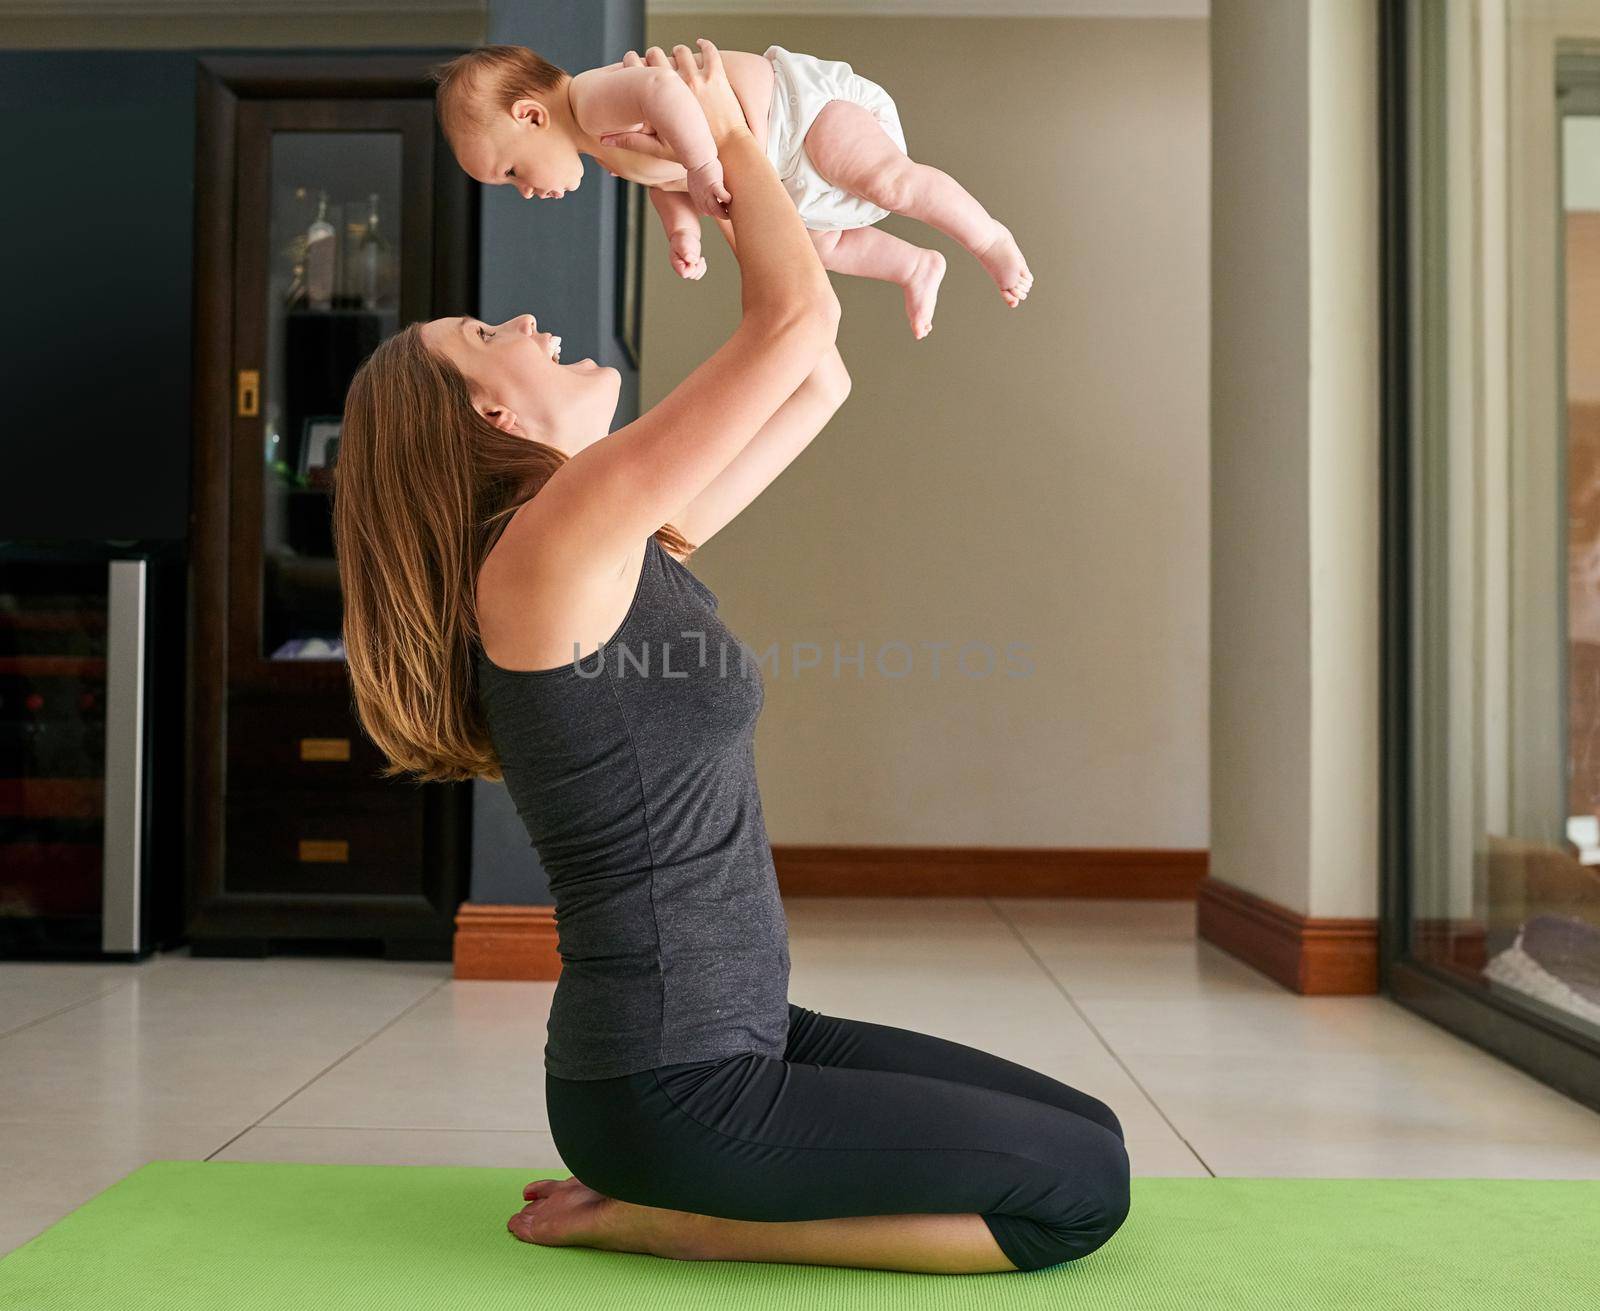 The best work out partner. a young mother and her baby at home. by YuriArcurs